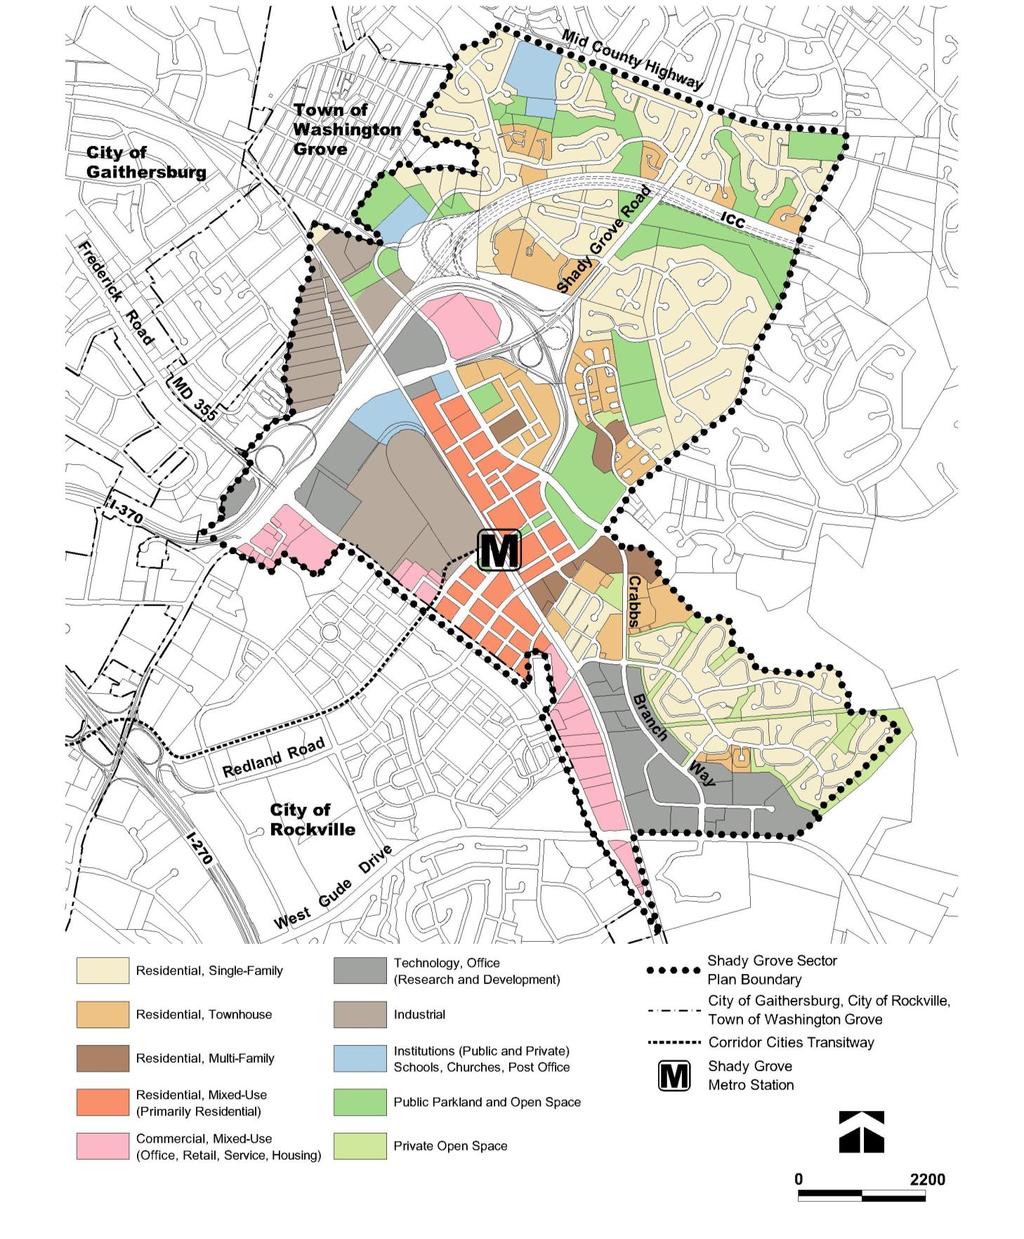 Proposed Land Use Approved and